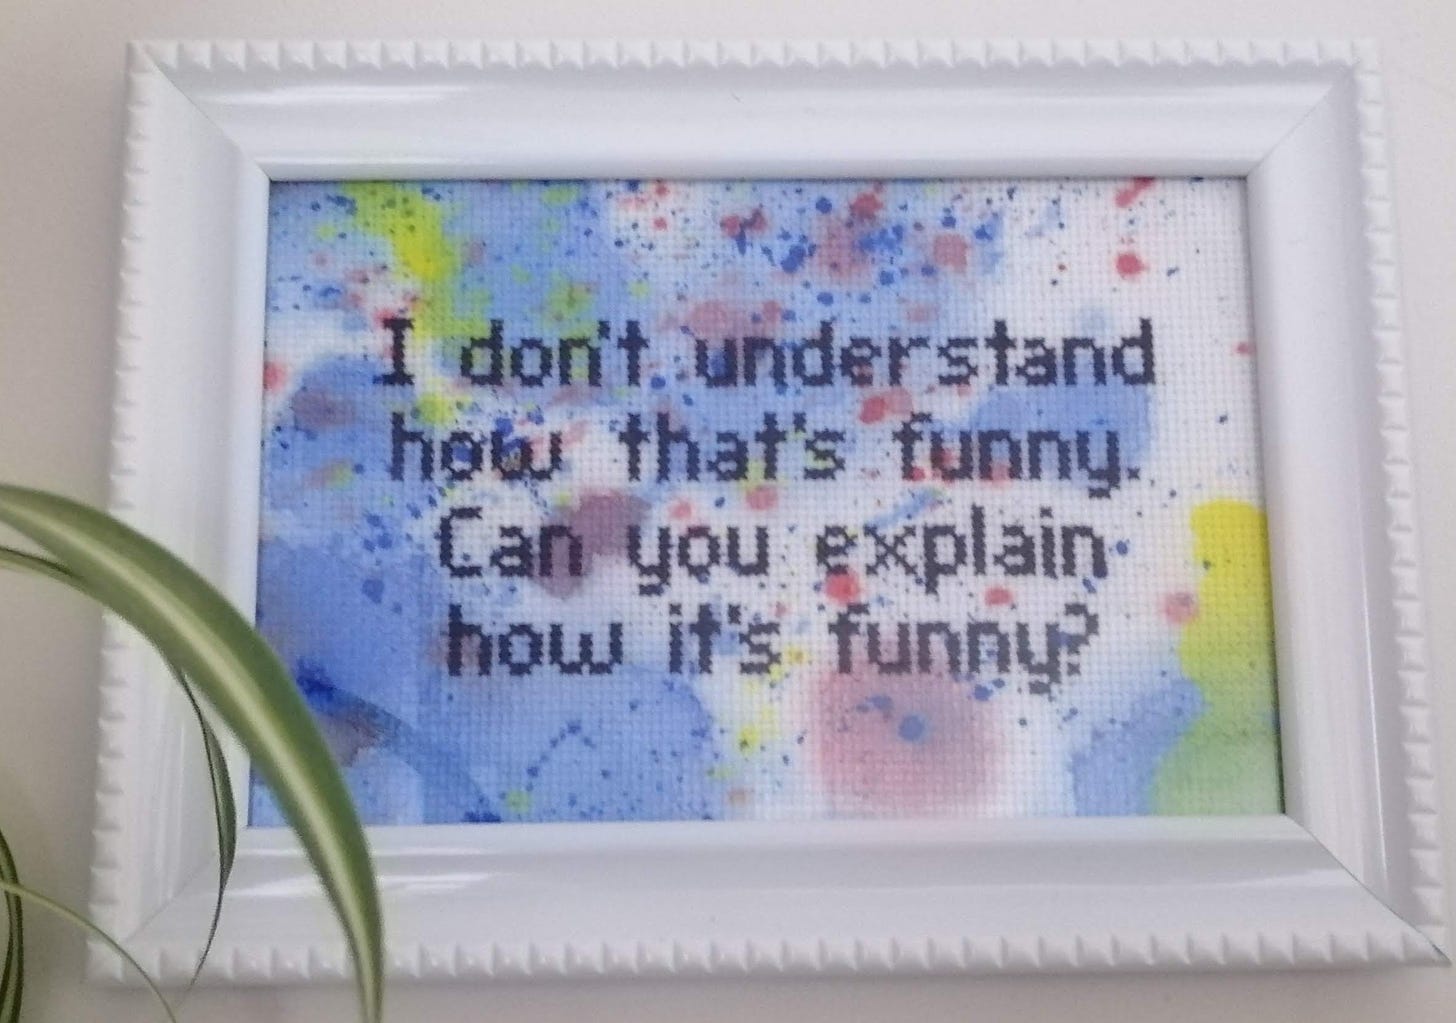 Completed cross stitch in a frame on a splotchy rainbow fabric. The text reads "I don't understand how that's funny. Can you explain how it's funny?"